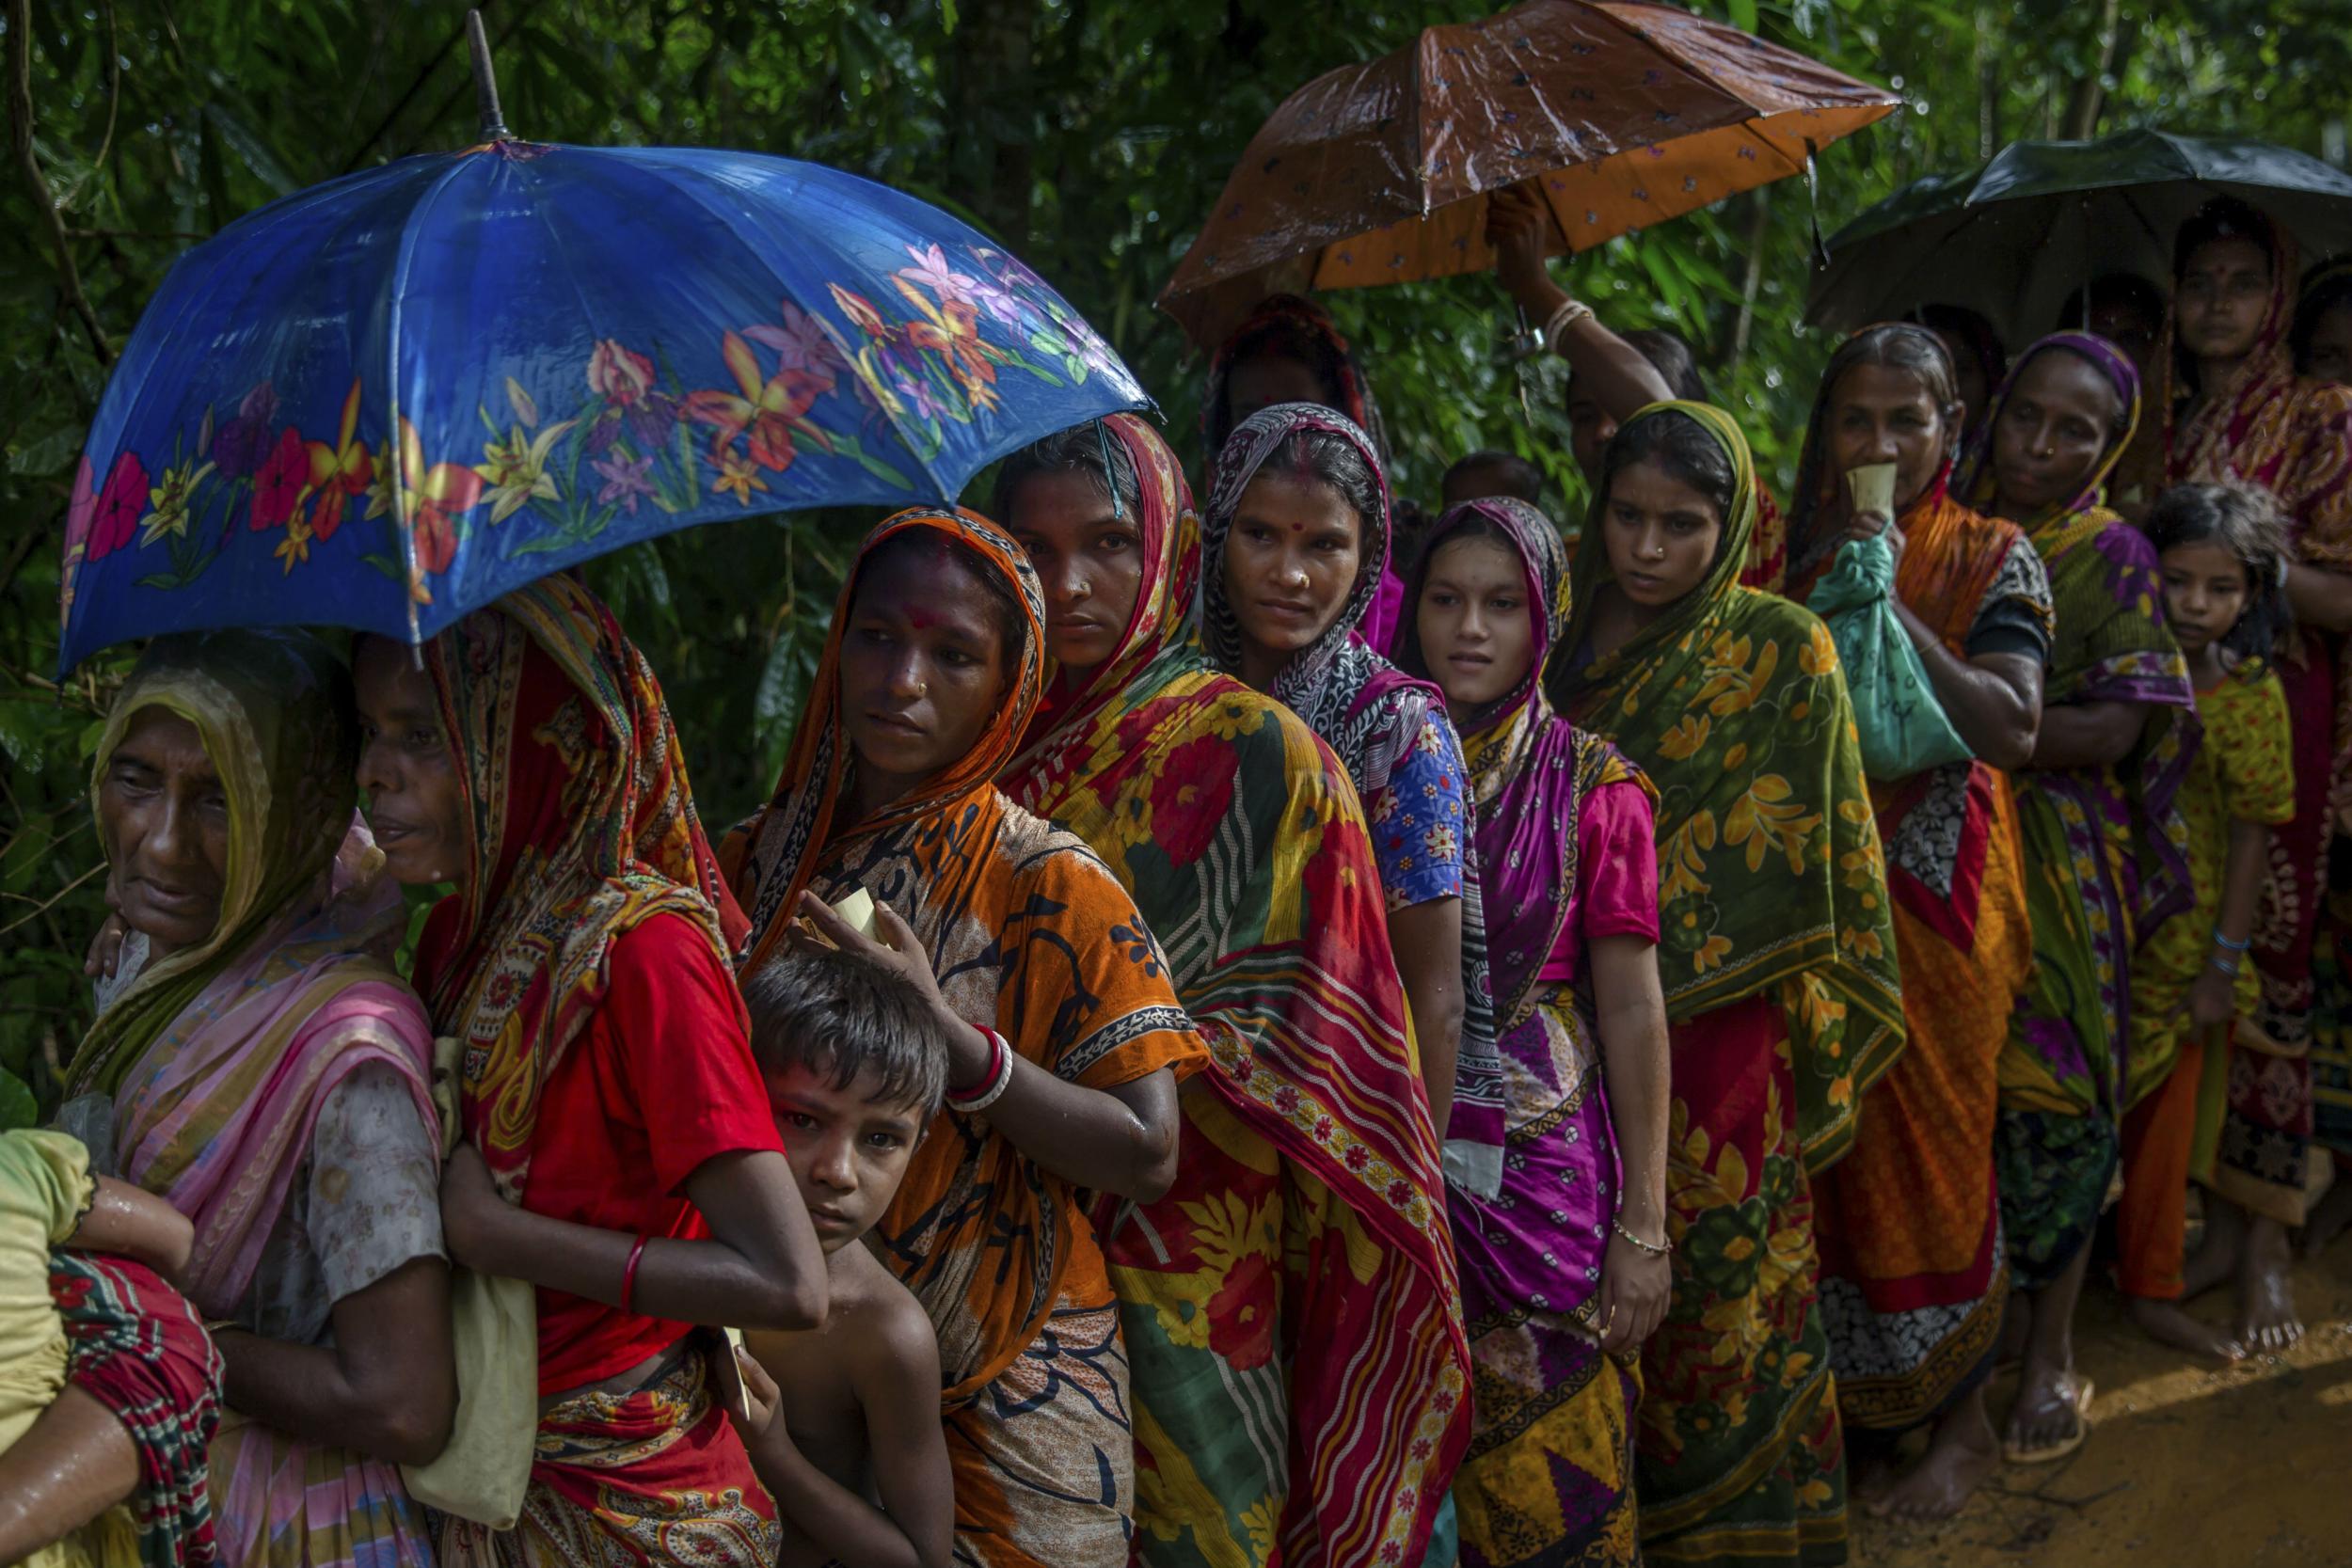 Men and women wait for their turn to collect aid at refugee camp set up for Hindu refugees near Kutupalong, Bangladesh on Sept. 26, 2017